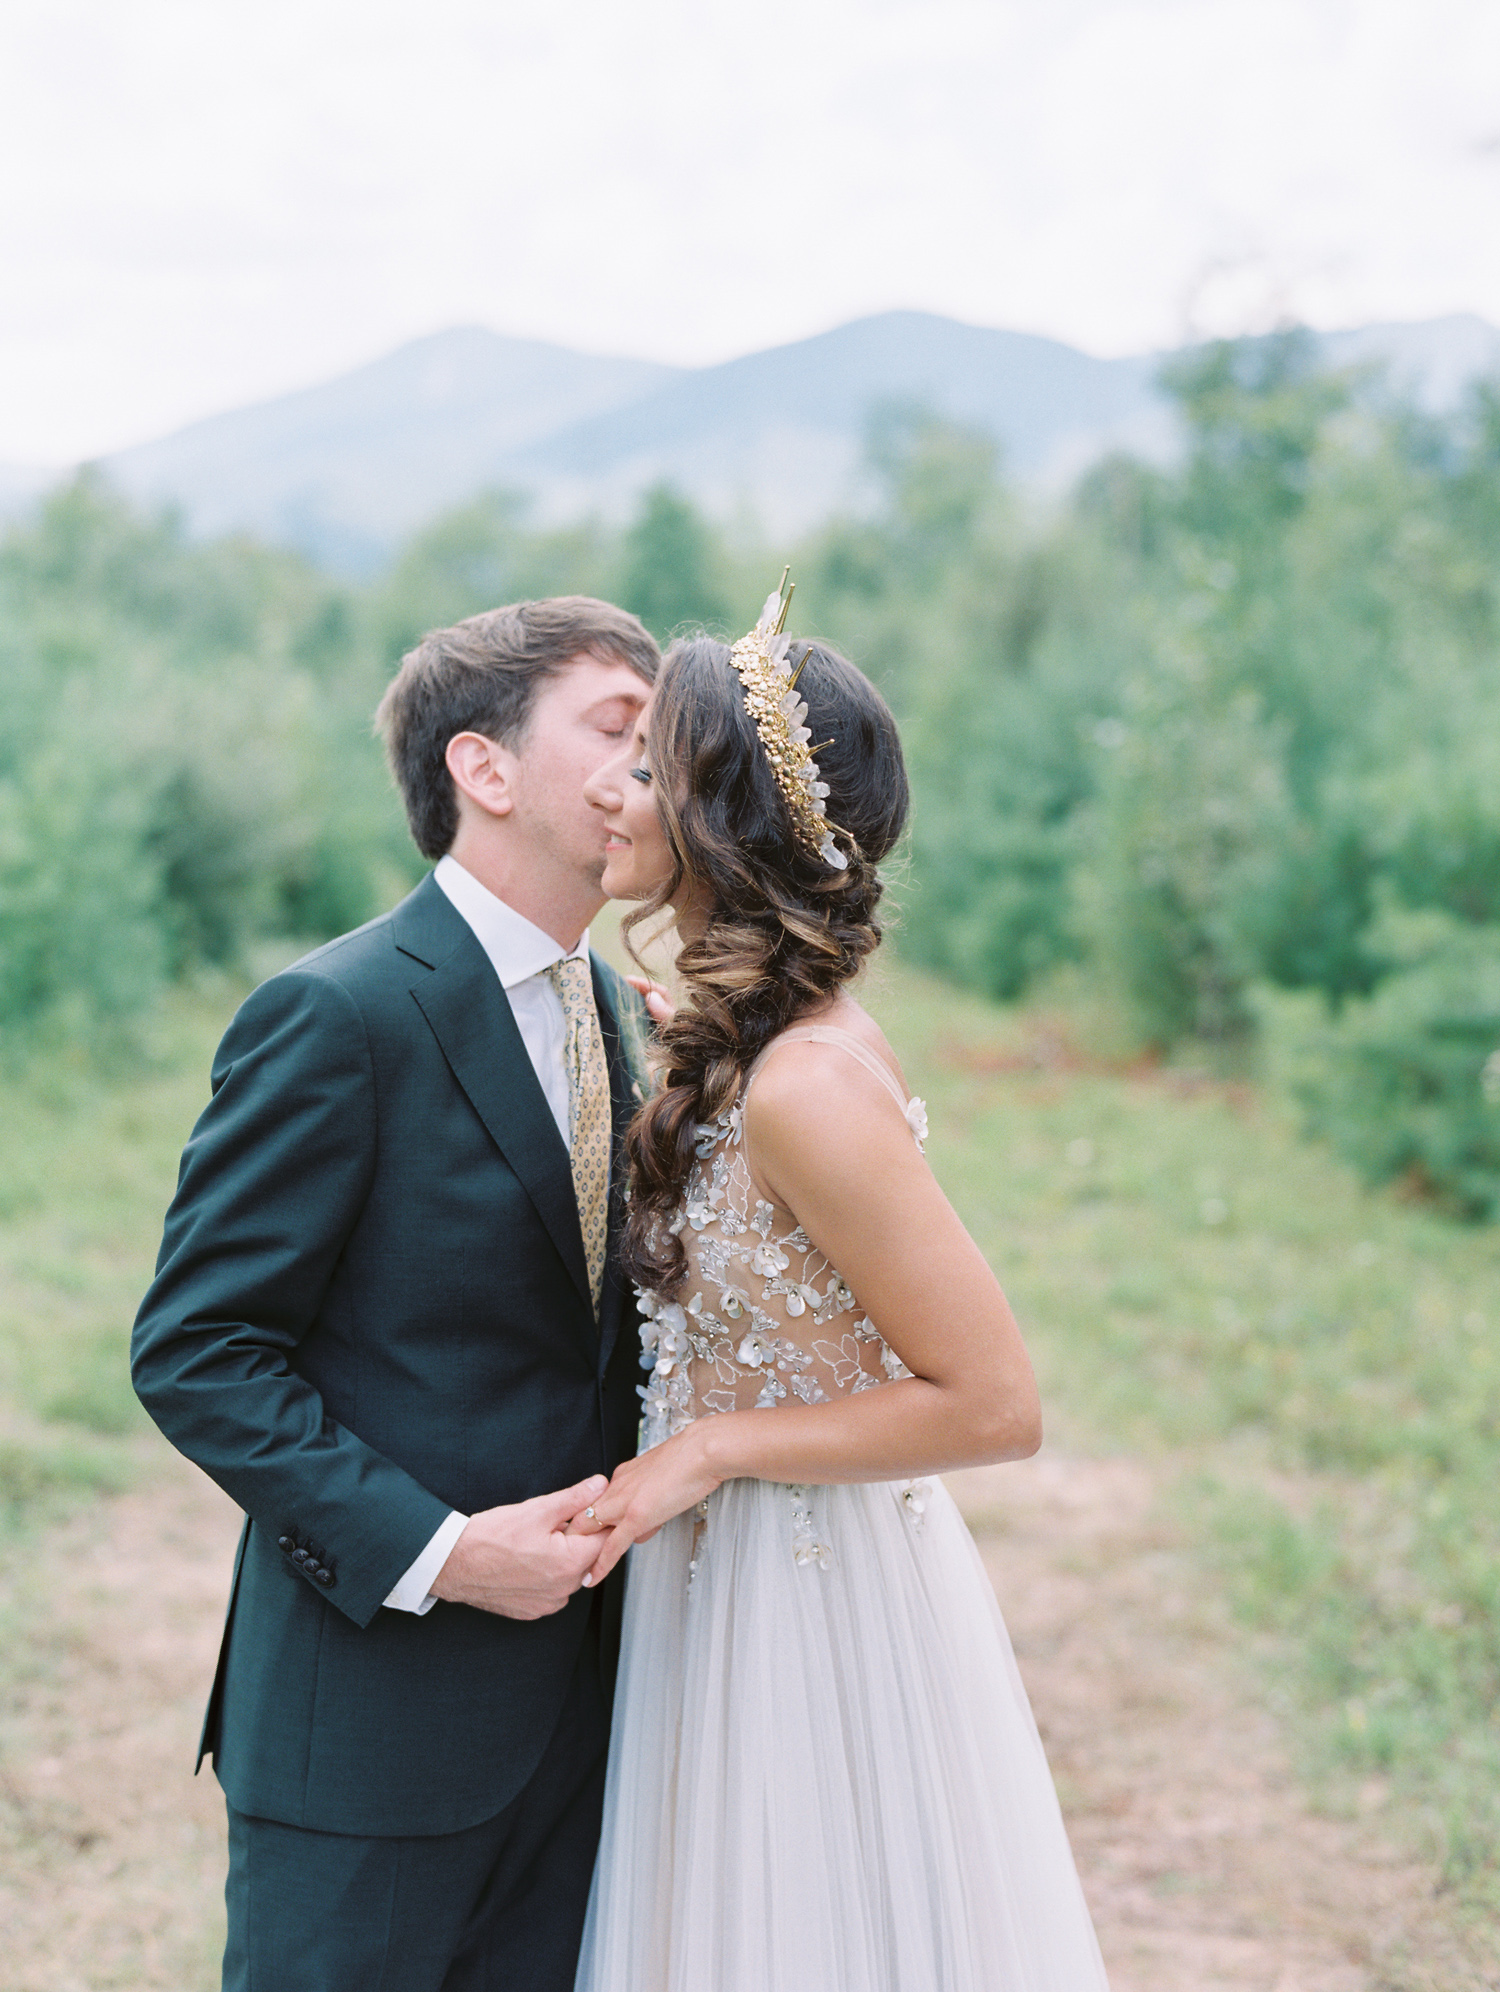 Adirondack Mountain Wedding | A Lake Placid Wedding with Whiteface Mountain. Luxury Bridal fashion and laid back elegance make this mountain wedding one to remember. Photographed by Mary Dougherty